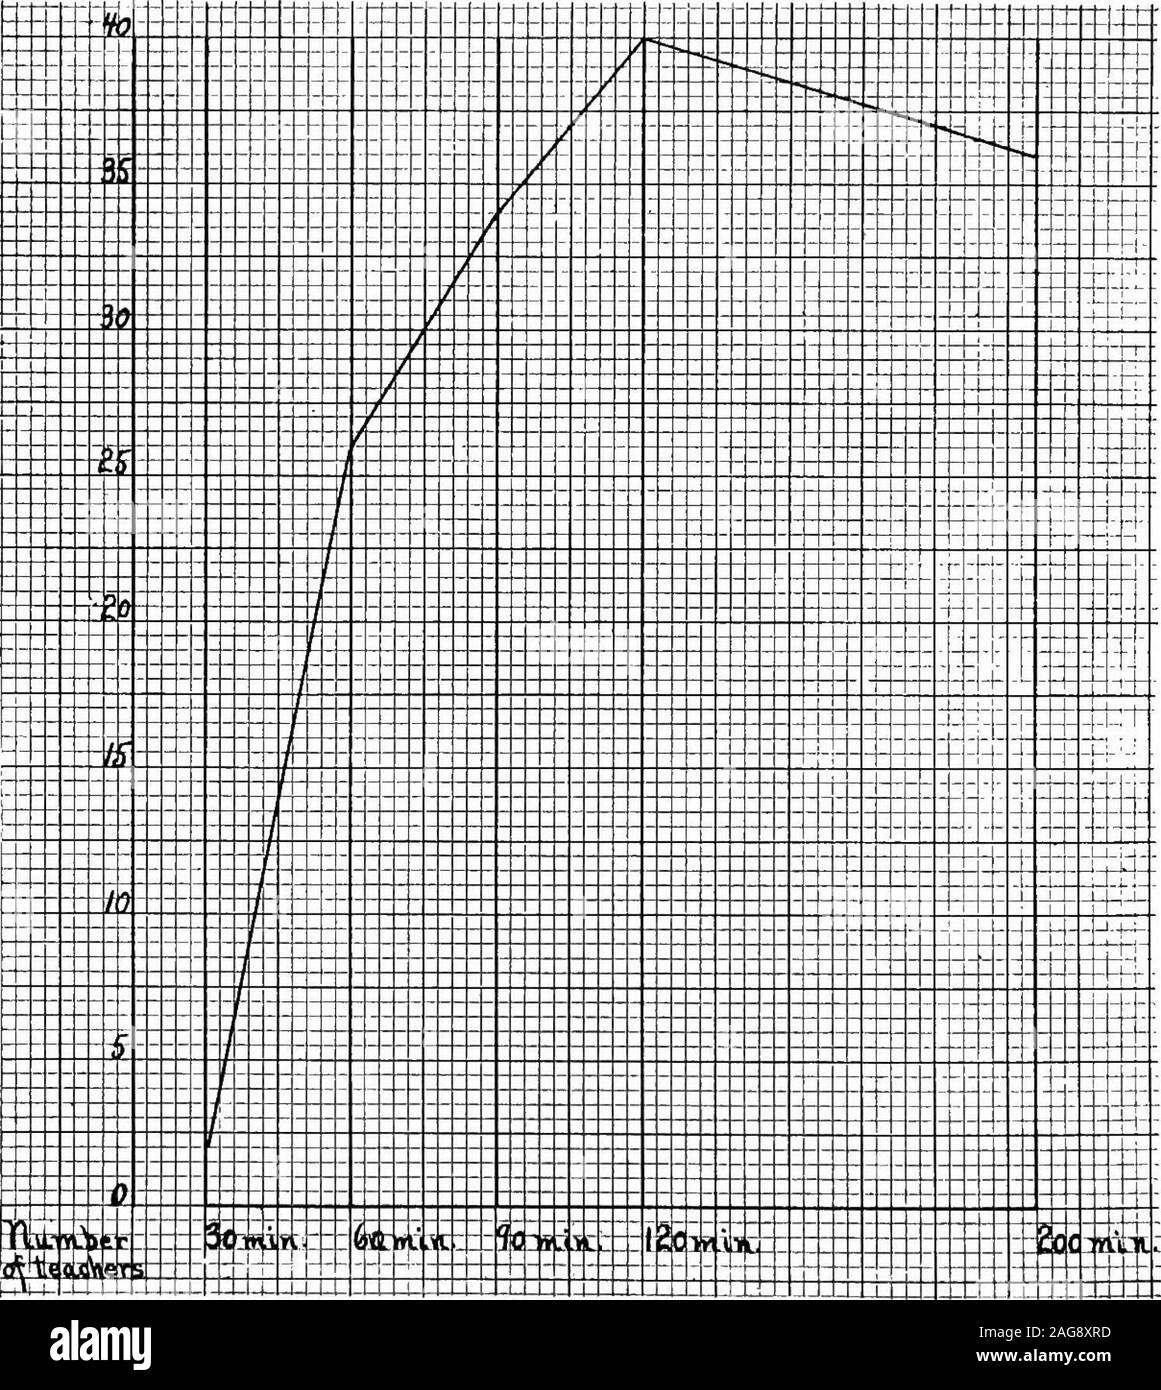 . School survey, Grand Rapids, Michigan, 1916. s. TABLE XLIX Showing the number of minutes teachers spend daily in preparingtheir school work. Number of Teachers Spending^ Number ofMinutes Indicated in Preparing Work Not Re- SCHOOL Under 30 30-60 61-90 91-120 121-200 Over 200 porting Central 1 5 12 14 .8 2 6 Union 0 4 10 12 7 1 5 South 0 10 5 7 11 2 0 Junior 1 7 7 7 10 1 0 Totals 2 26 34 40 36 6 11 Percentage 1.3 16.8 21.9 25.8 23.2 3.9 7.1 Median: Between 91 and 120 minutes, 288 SCHOOL SURVEY, GRAND RAPIDS, MICHIGAN from less than 30 minutes to more than 200 minutes. Speakinggenerally, the ti Stock Photo